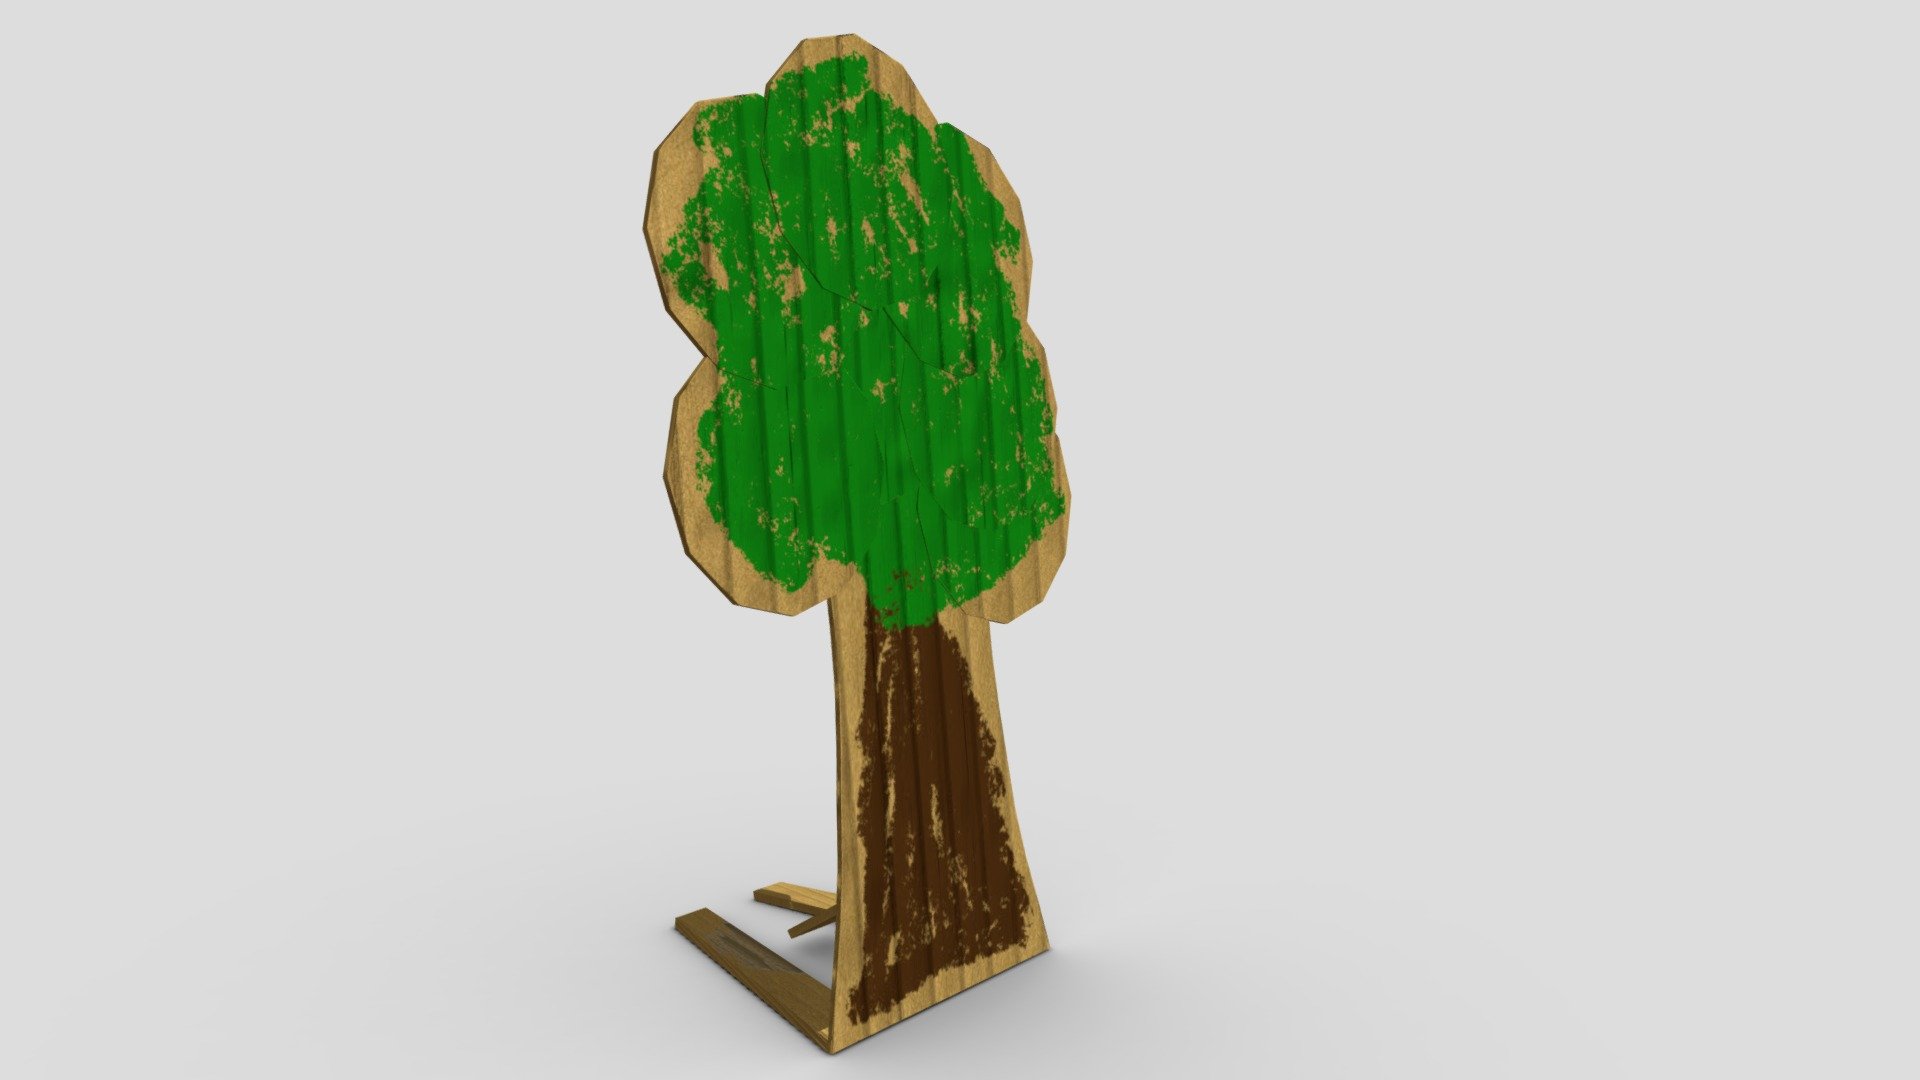 Created for a University of Gloucestershire project. For entertainment and educational purposes only. Used in Patchwork Games' first game: Stitched Up - Cardboard Cutout Tree - 3D model by s4101141 3d model